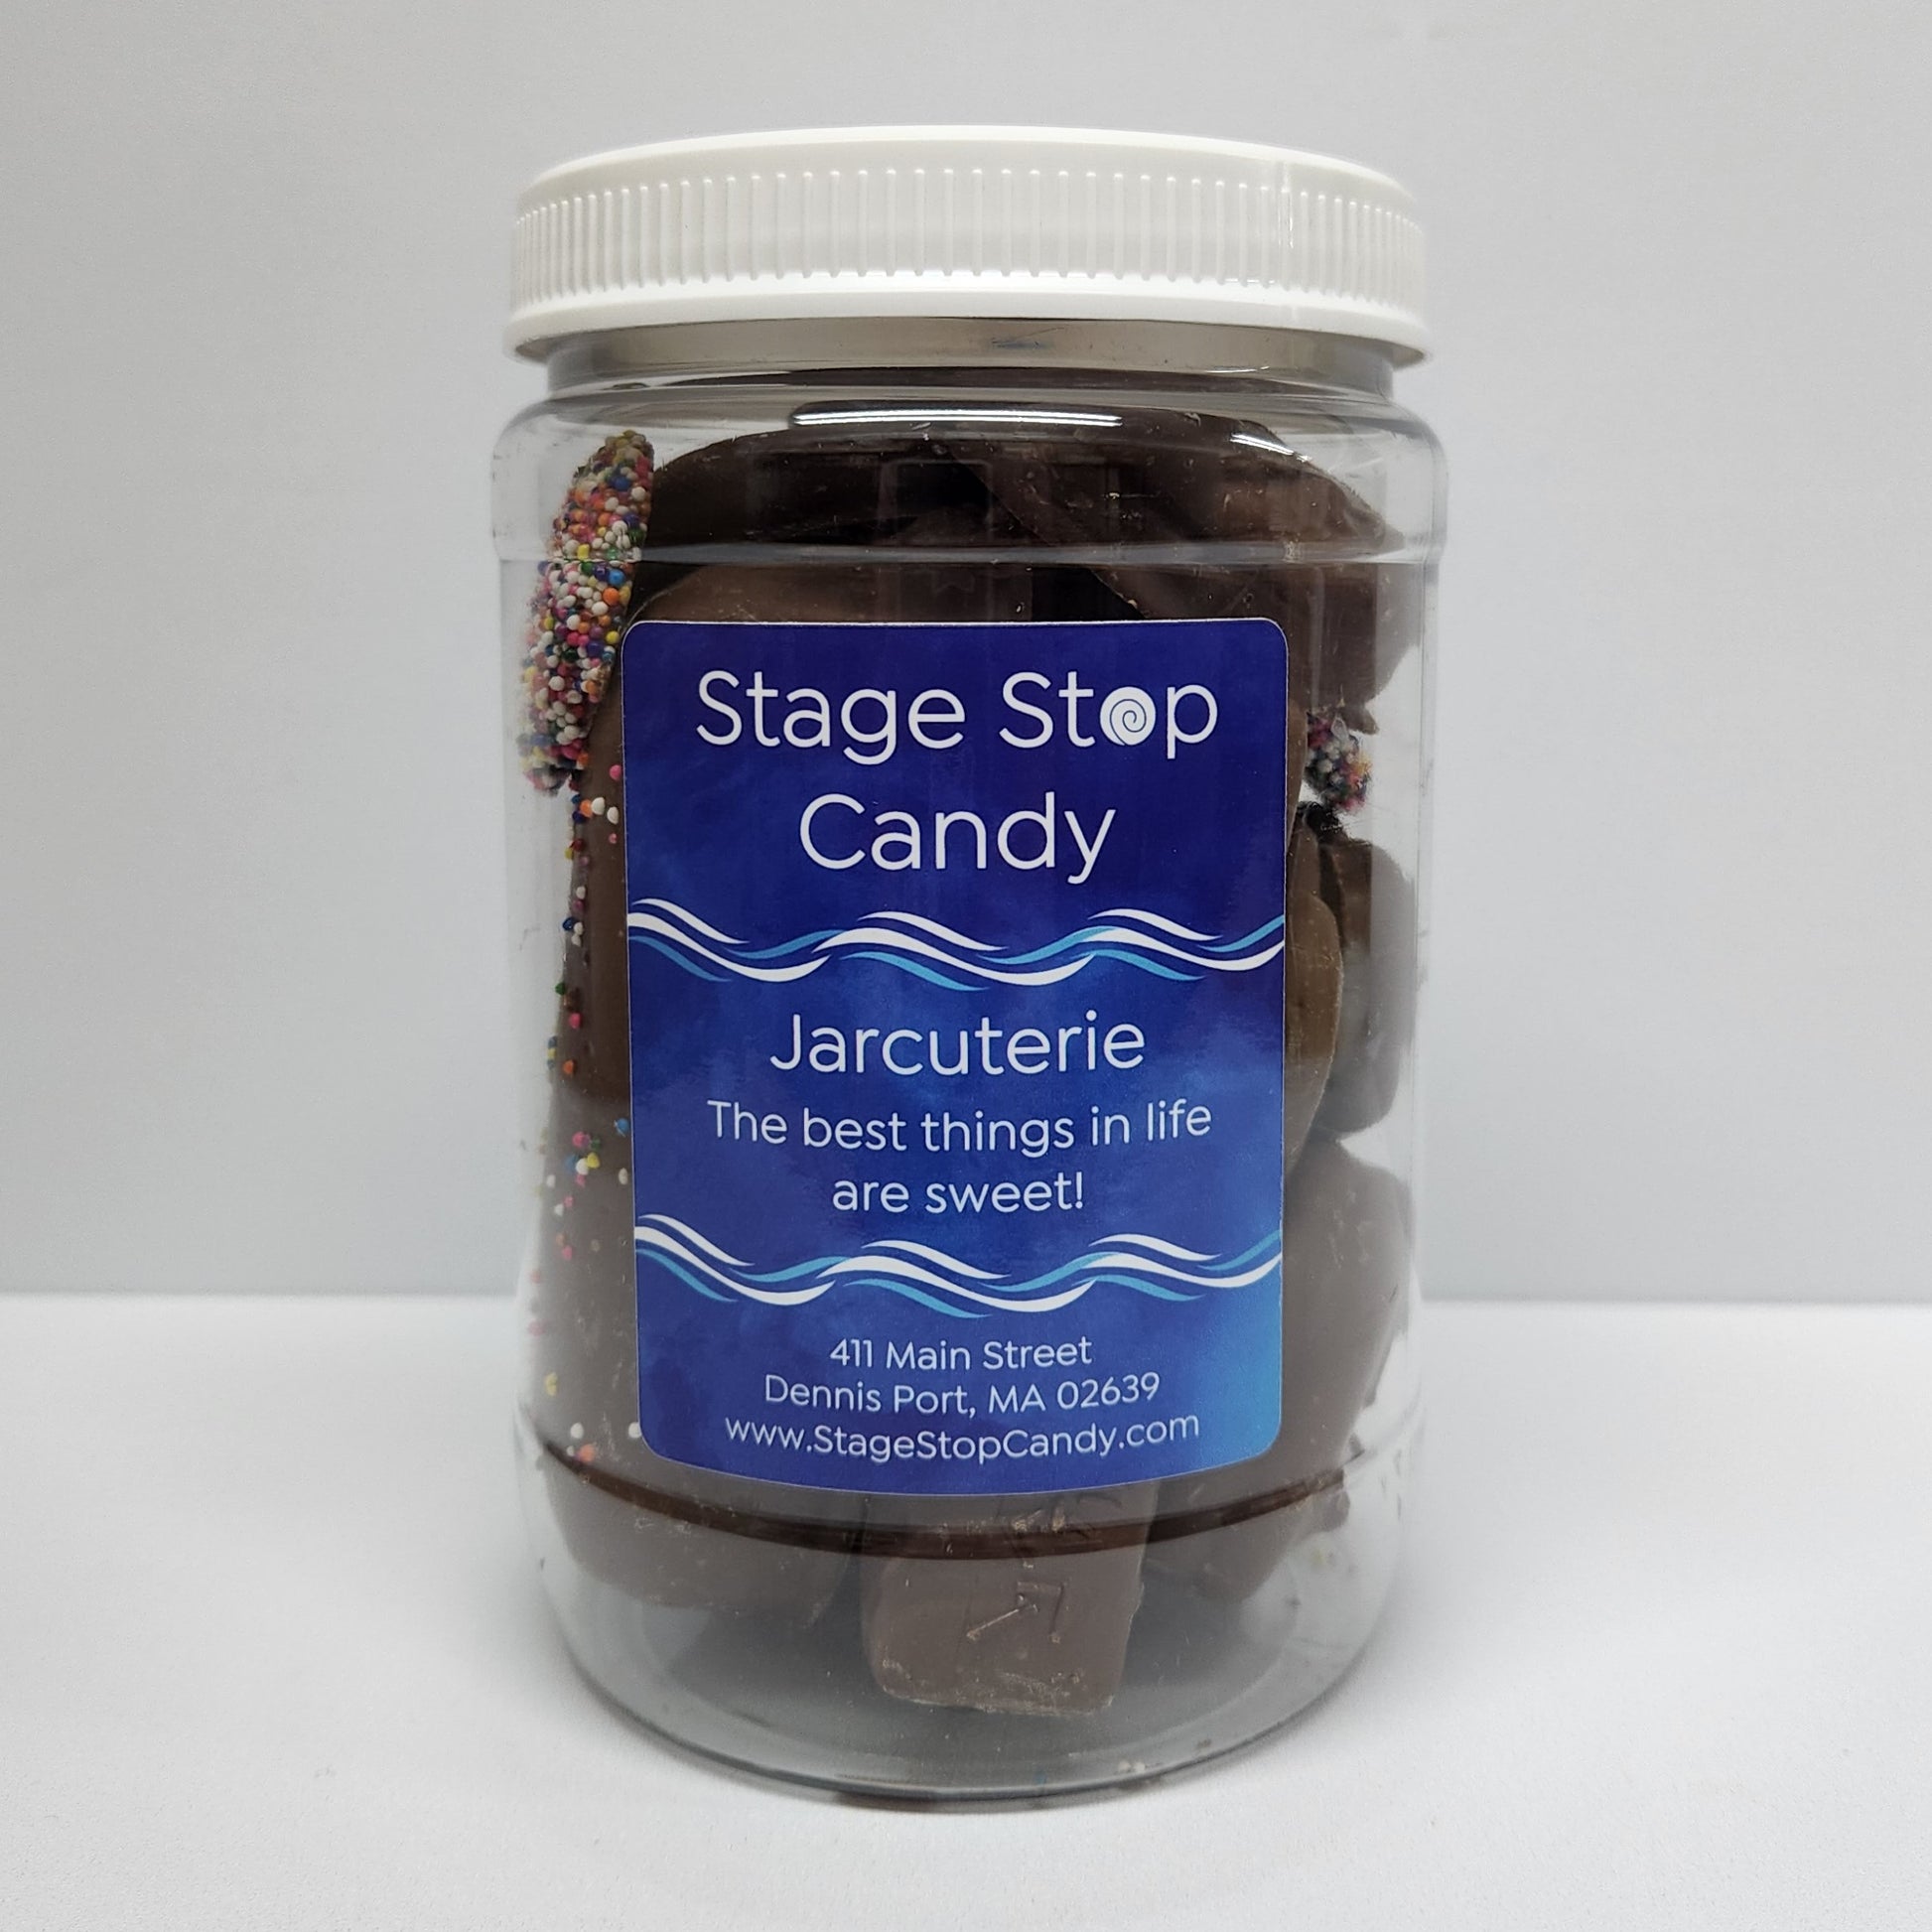 Stage Stop Candy’s Chocolate Lovers Jarcuterie includes: Chocolate Covered Oreos, Pretzels, Wafer Cookies, Shortbread Cookie, a Rice Krispie Treat, a Twinkie, and Nonpareils